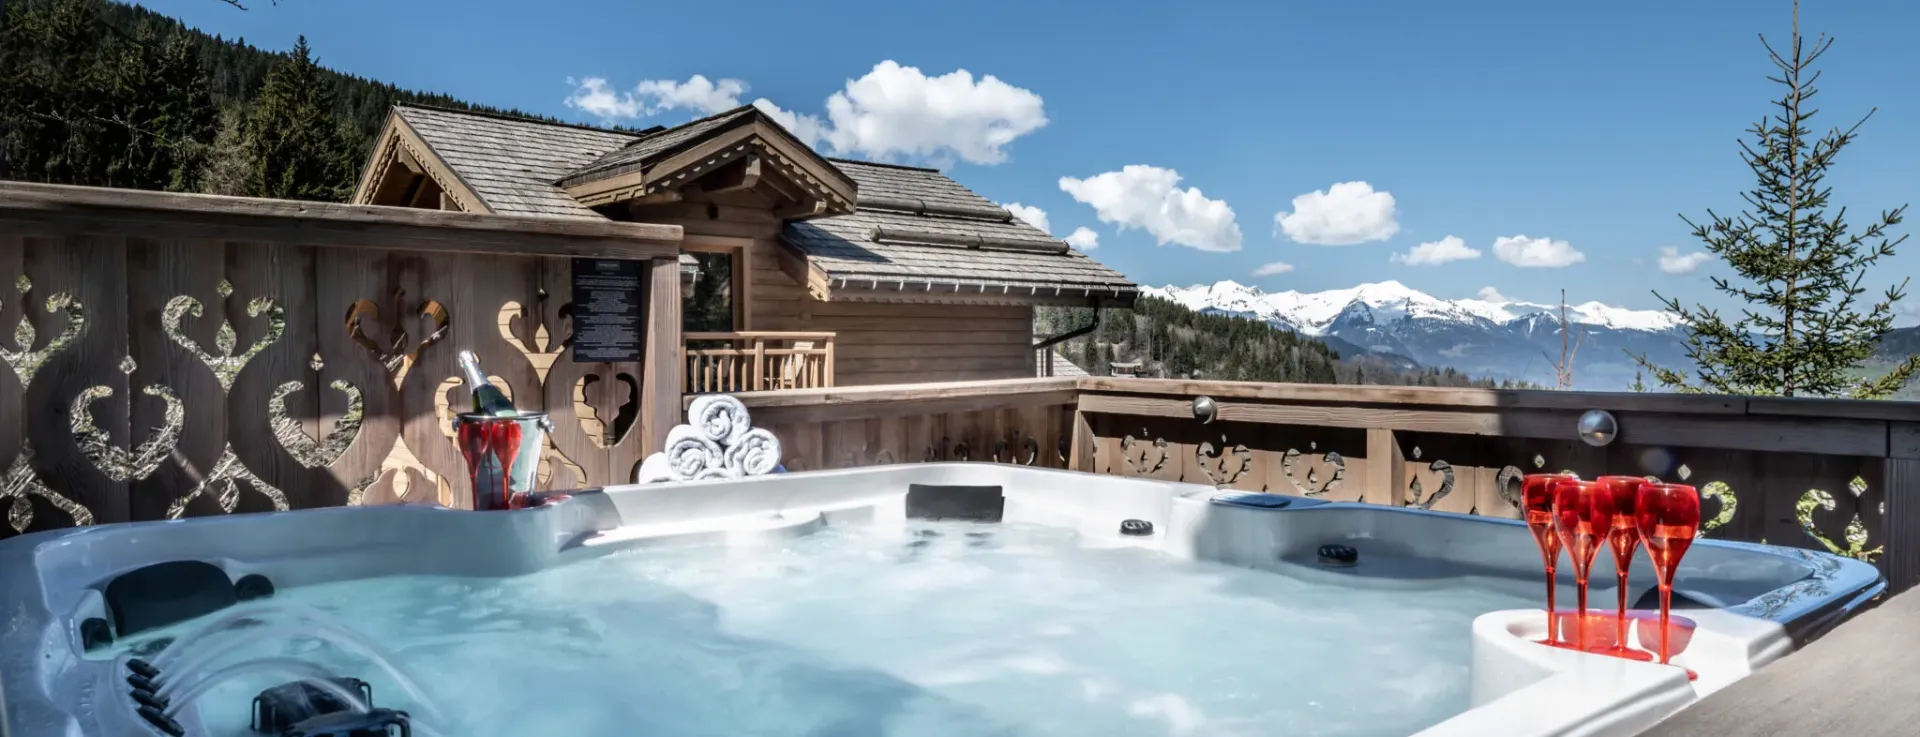 luxury catered chalet with hot tub